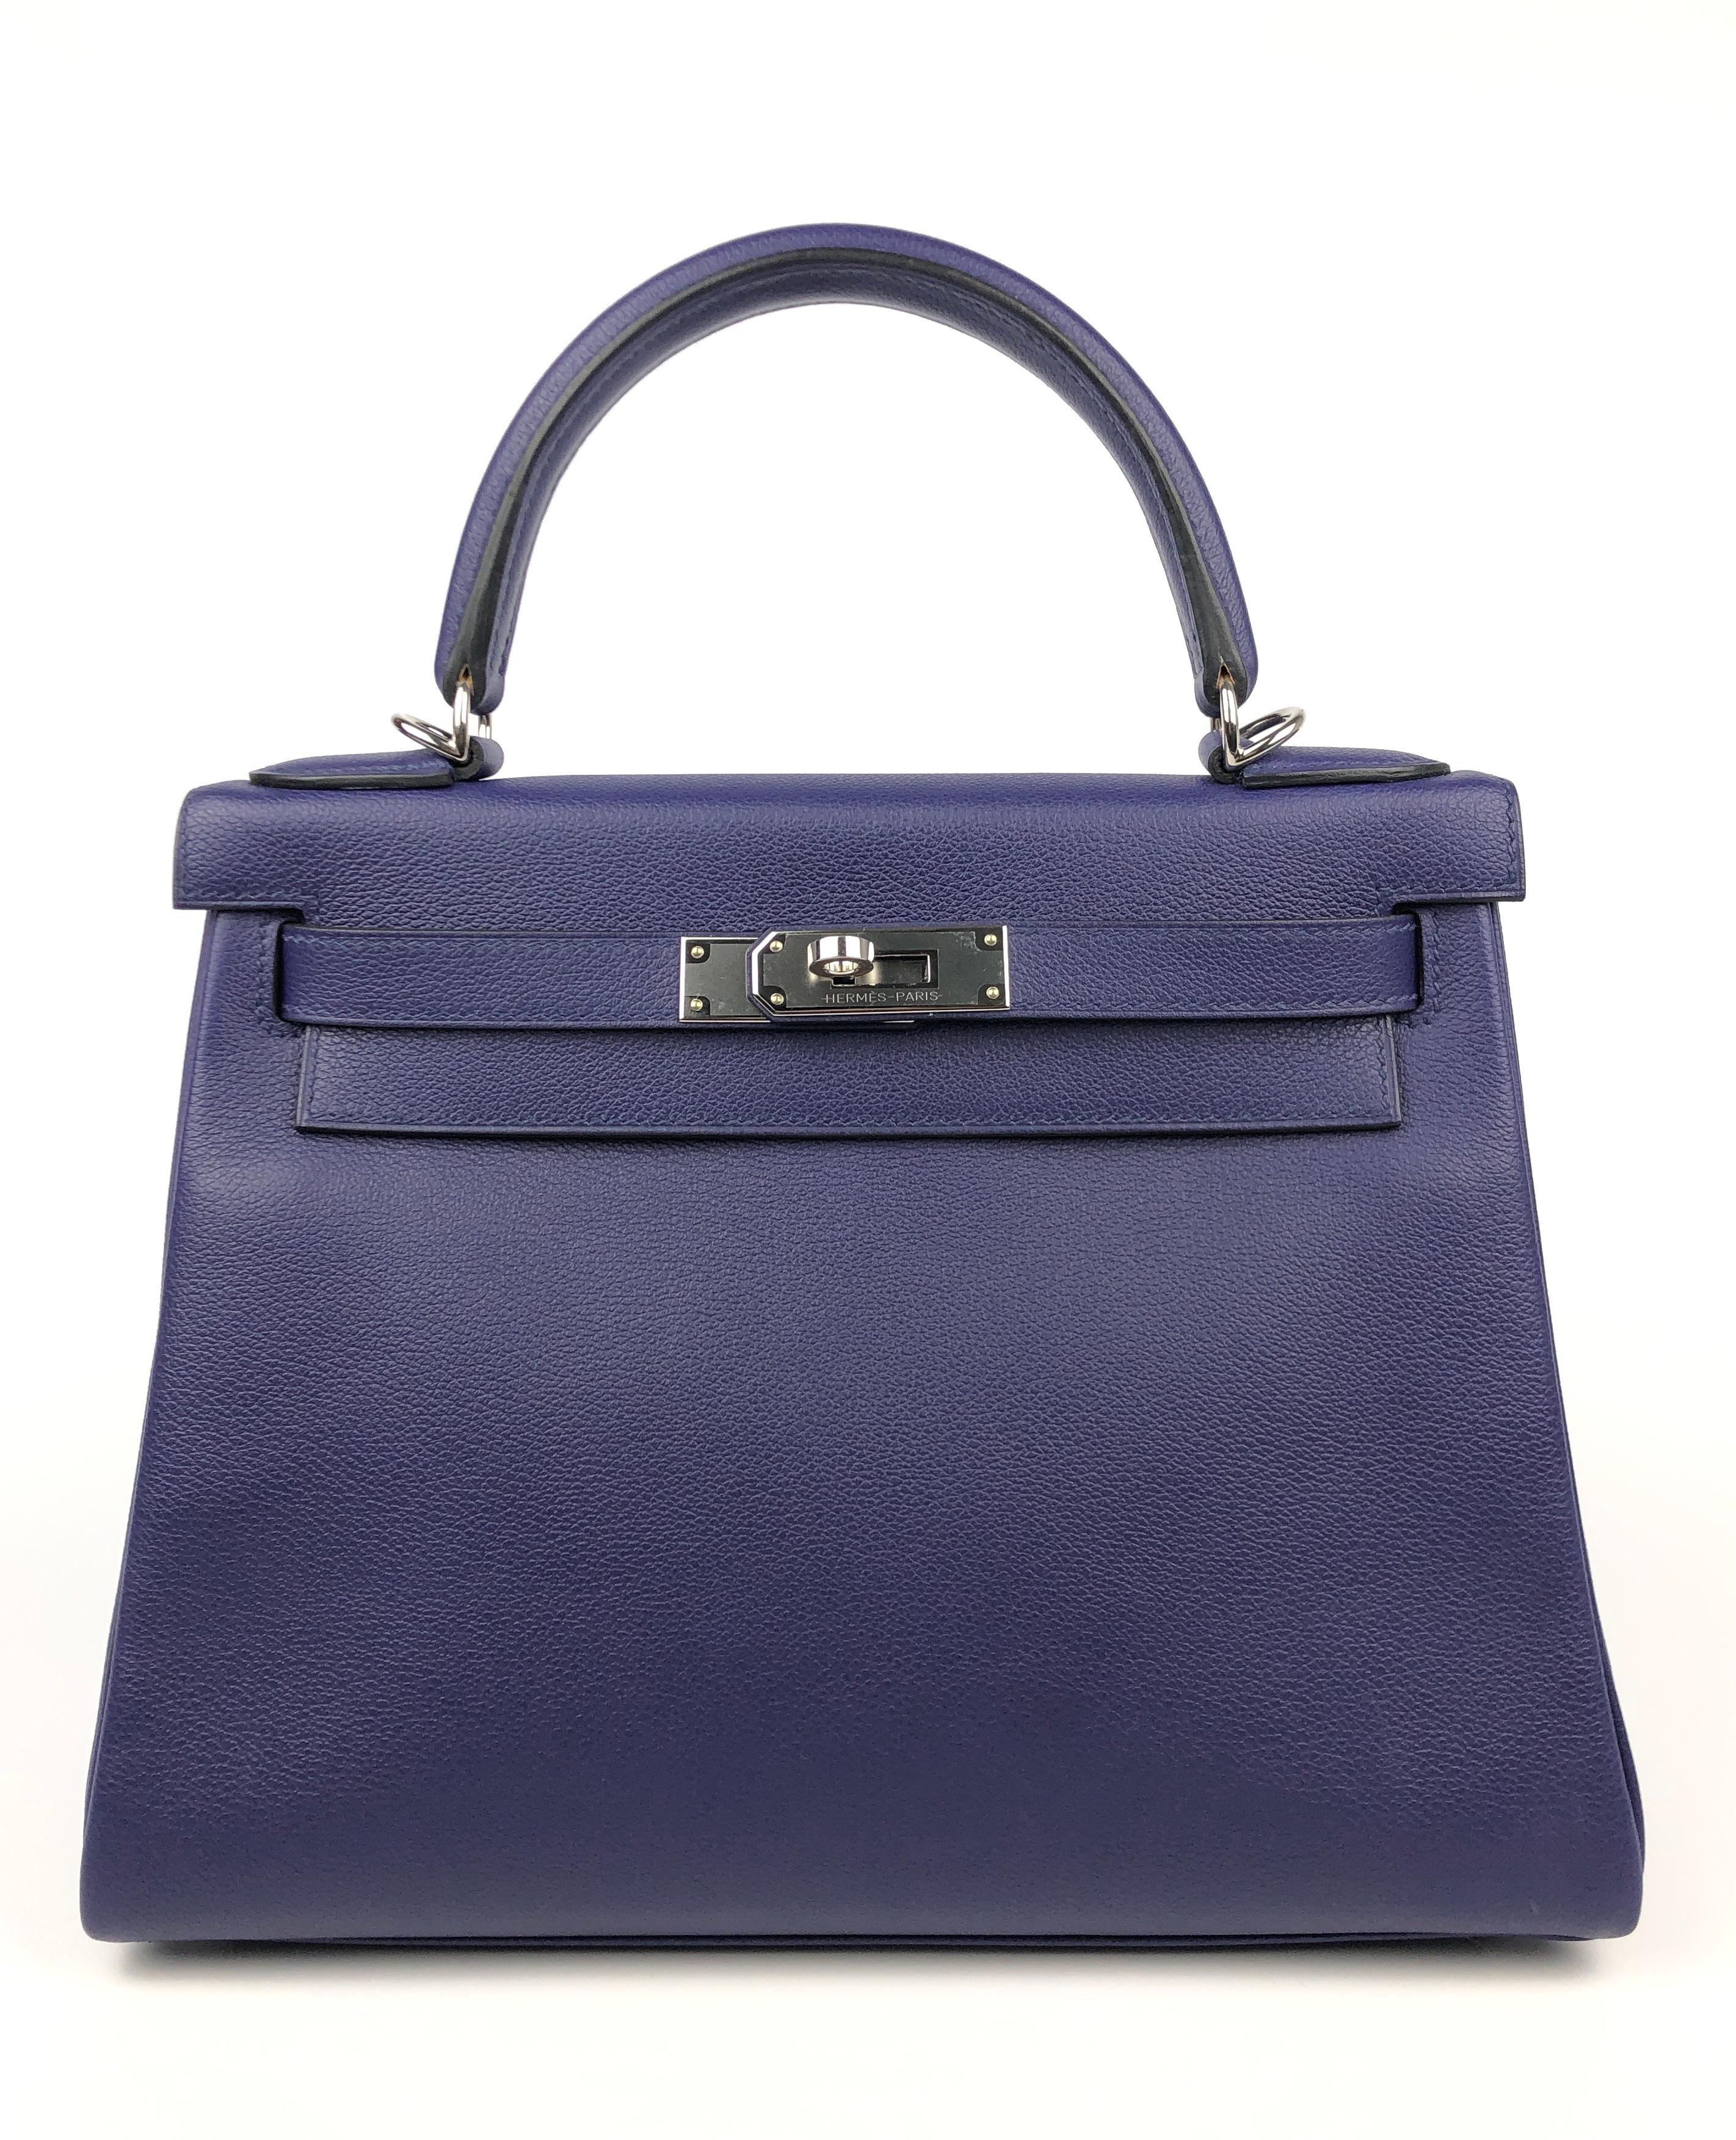 Stunning Hermes Kelly 28 Verso Blue Encre Magnolia Pink Interior Palladium Hardware. Pristine Almost Like New with Plastic on Hardware and some feet. C Stamp 2018. 

Shop with Confidence from Lux Addicts. Authenticity Guaranteed!